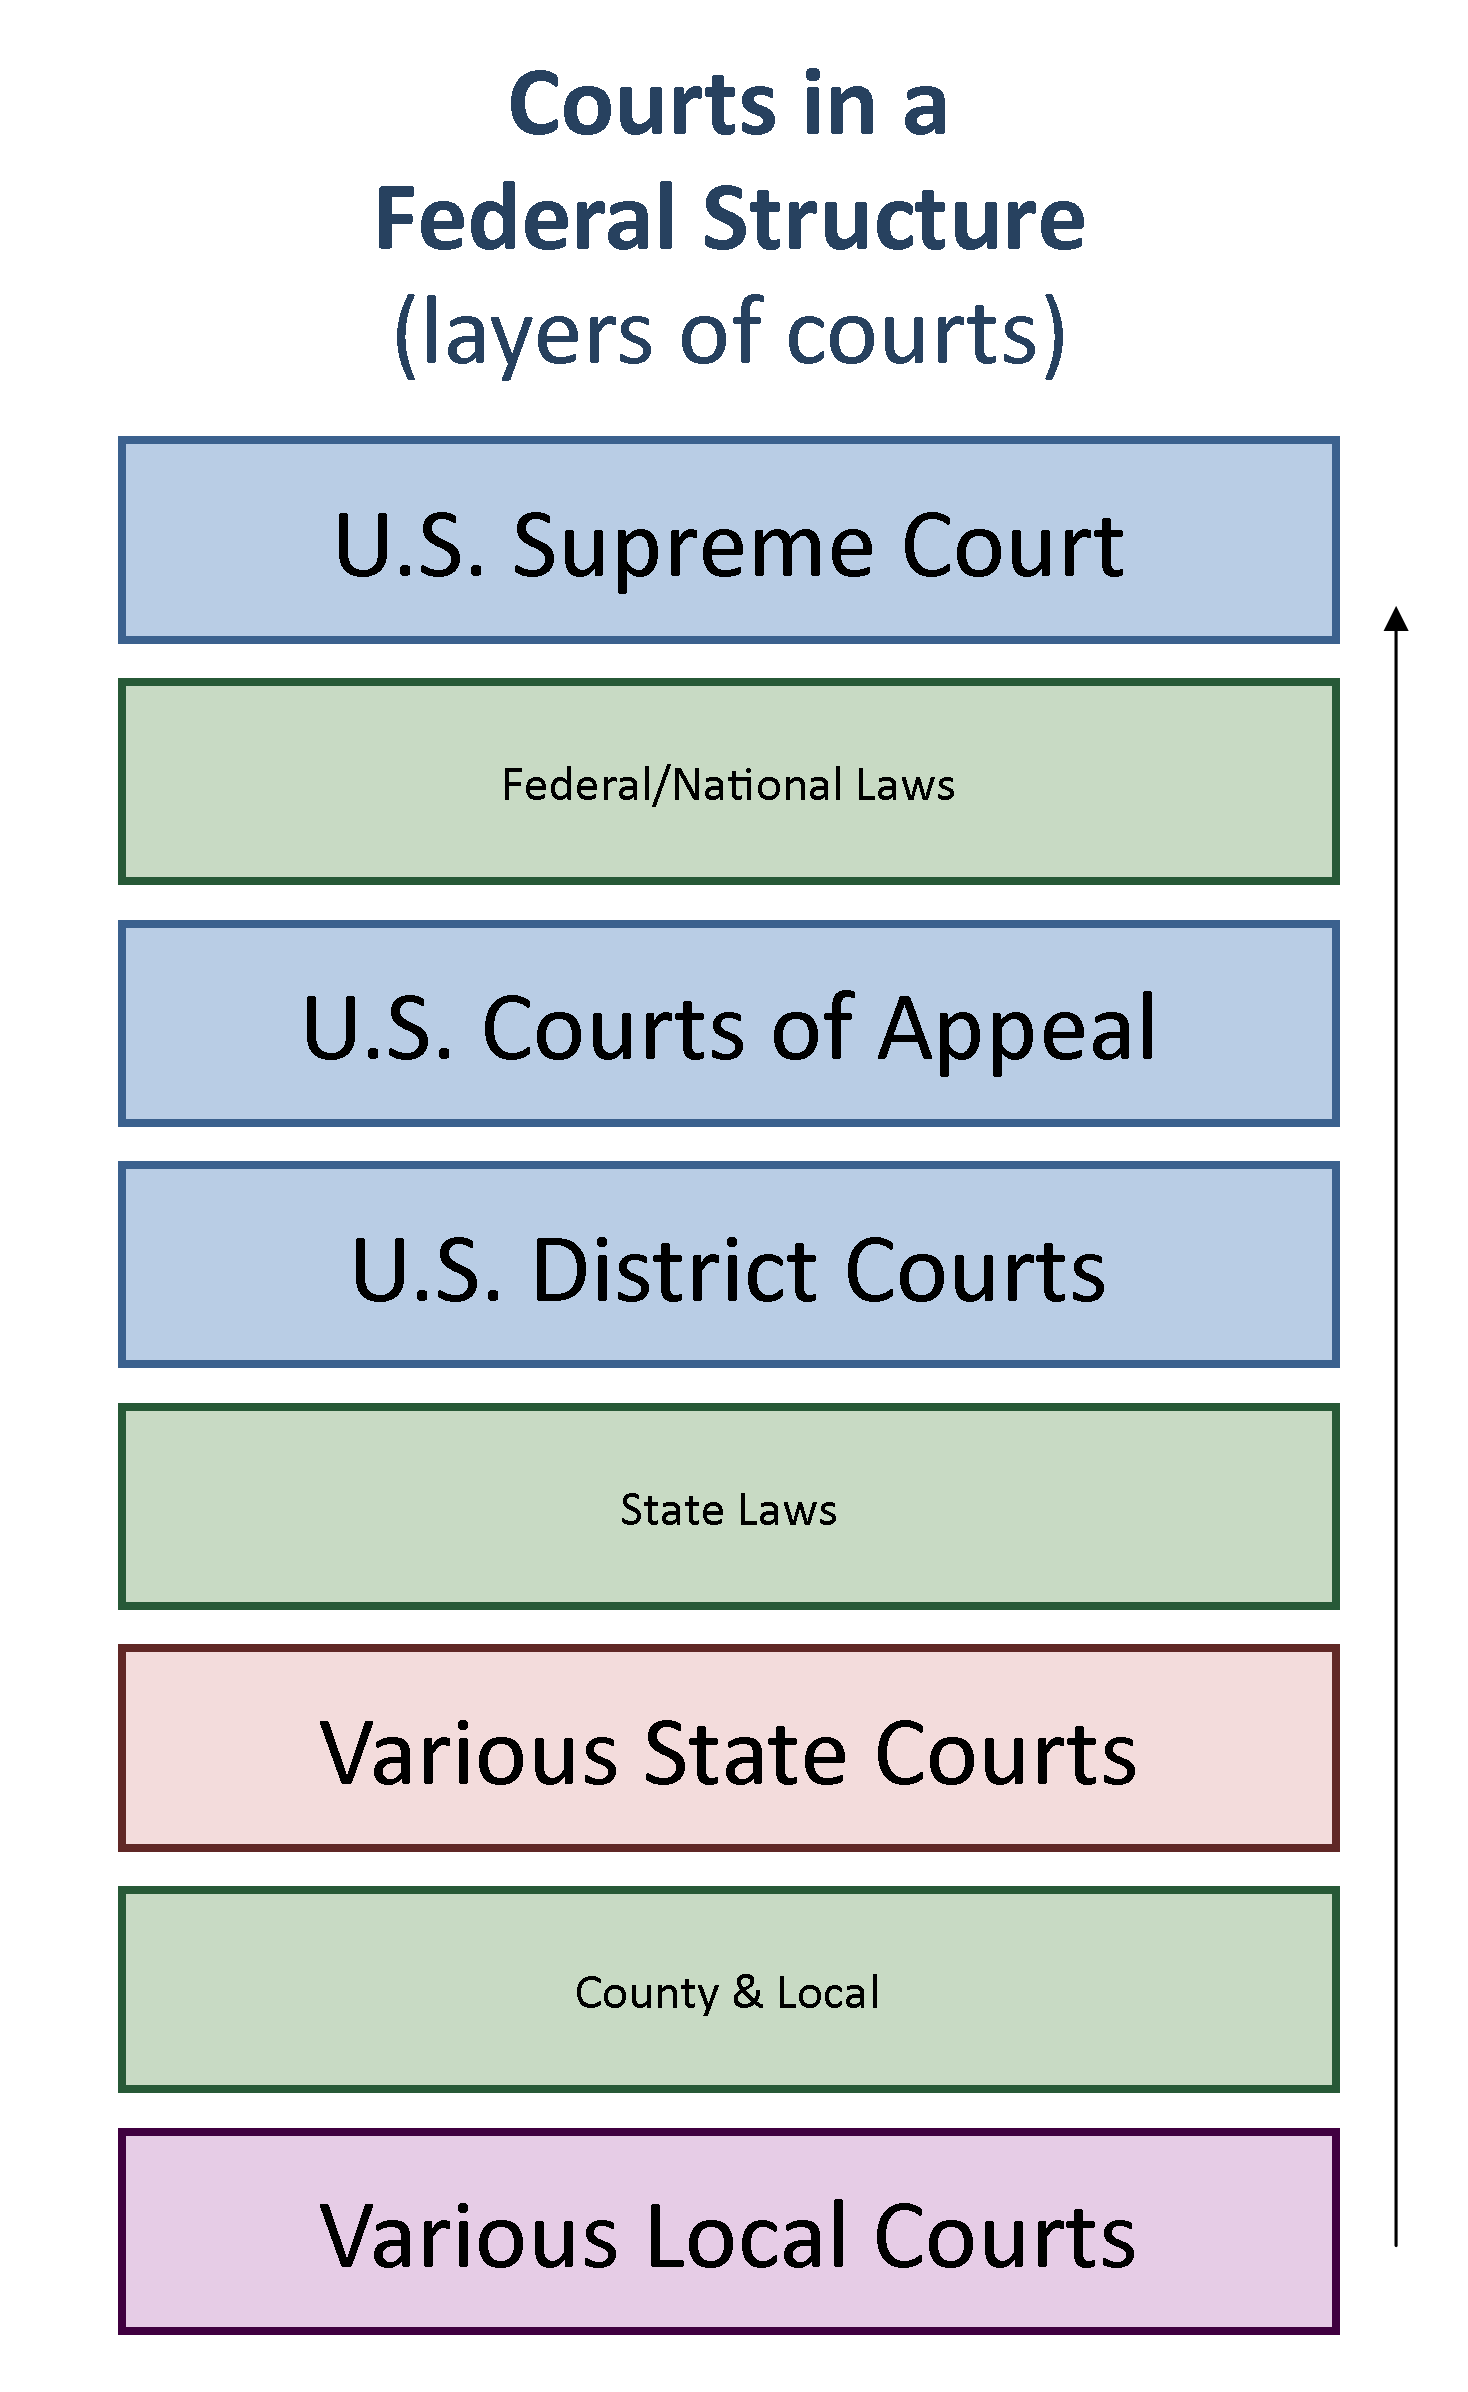 Chart showing how courts are structure vertically from local at the bottom to the Supreme Court at the top.